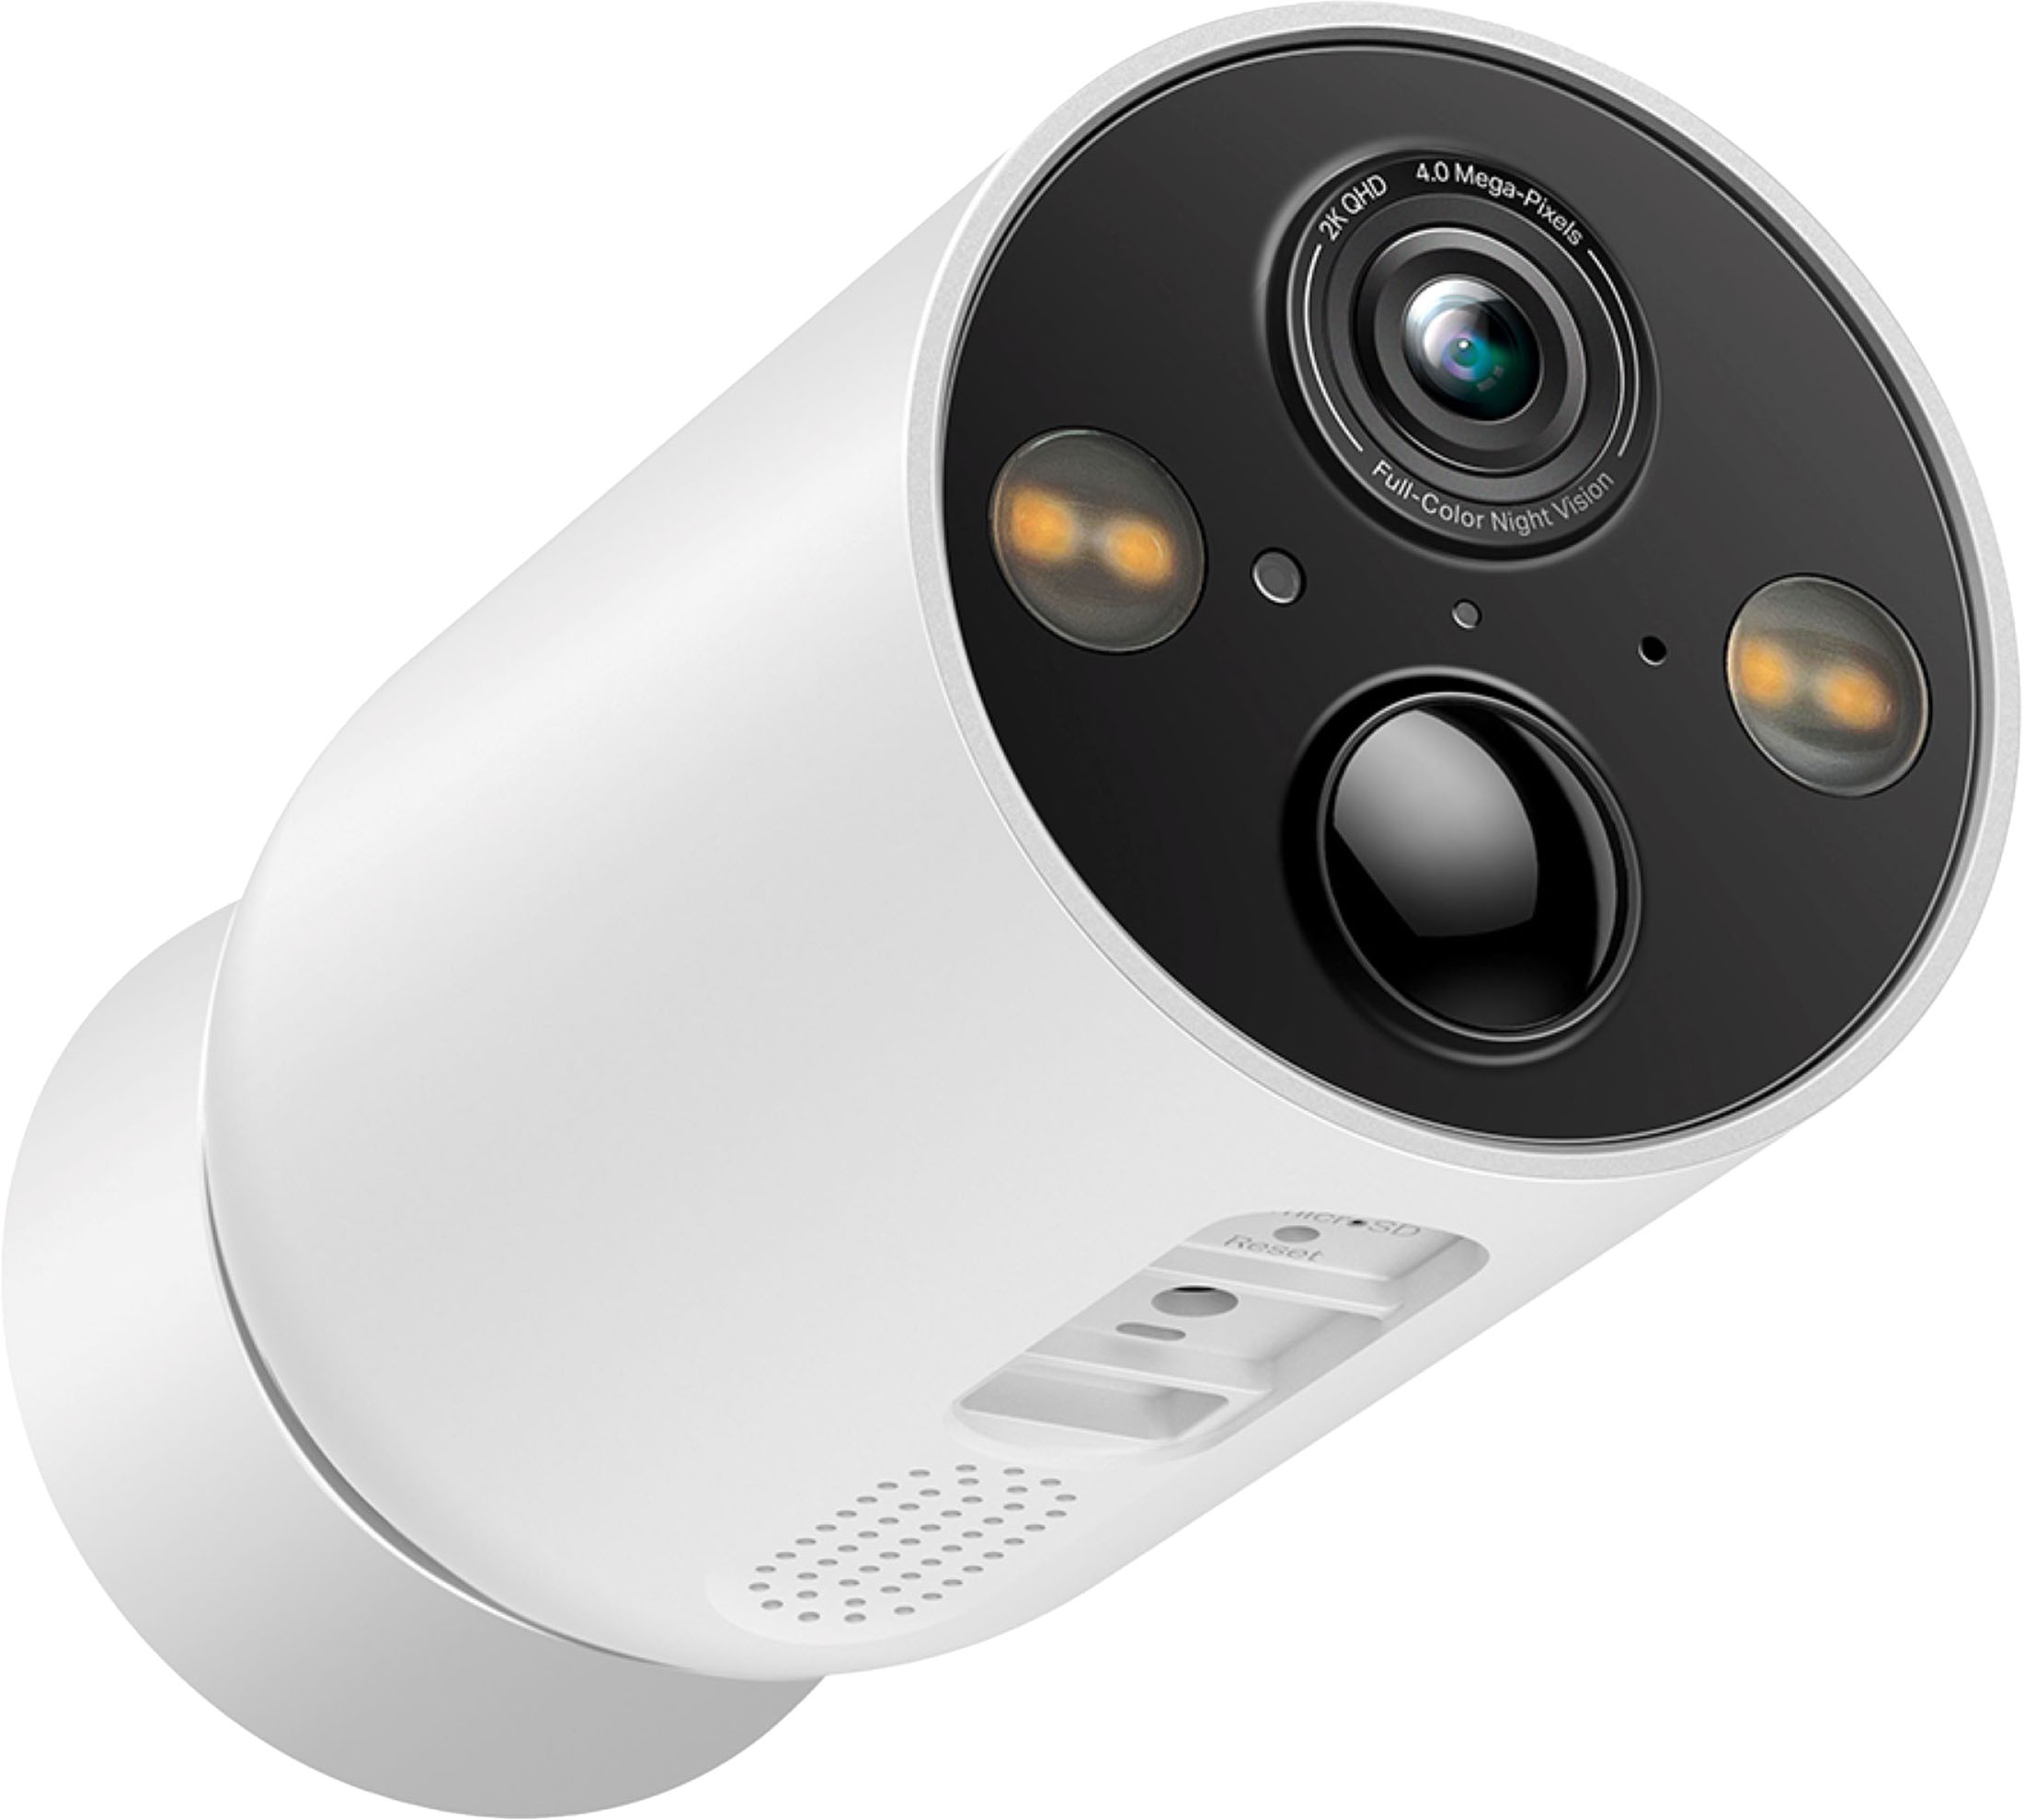 TP-Link's new Tapo outdoor security cam boasts color night vision